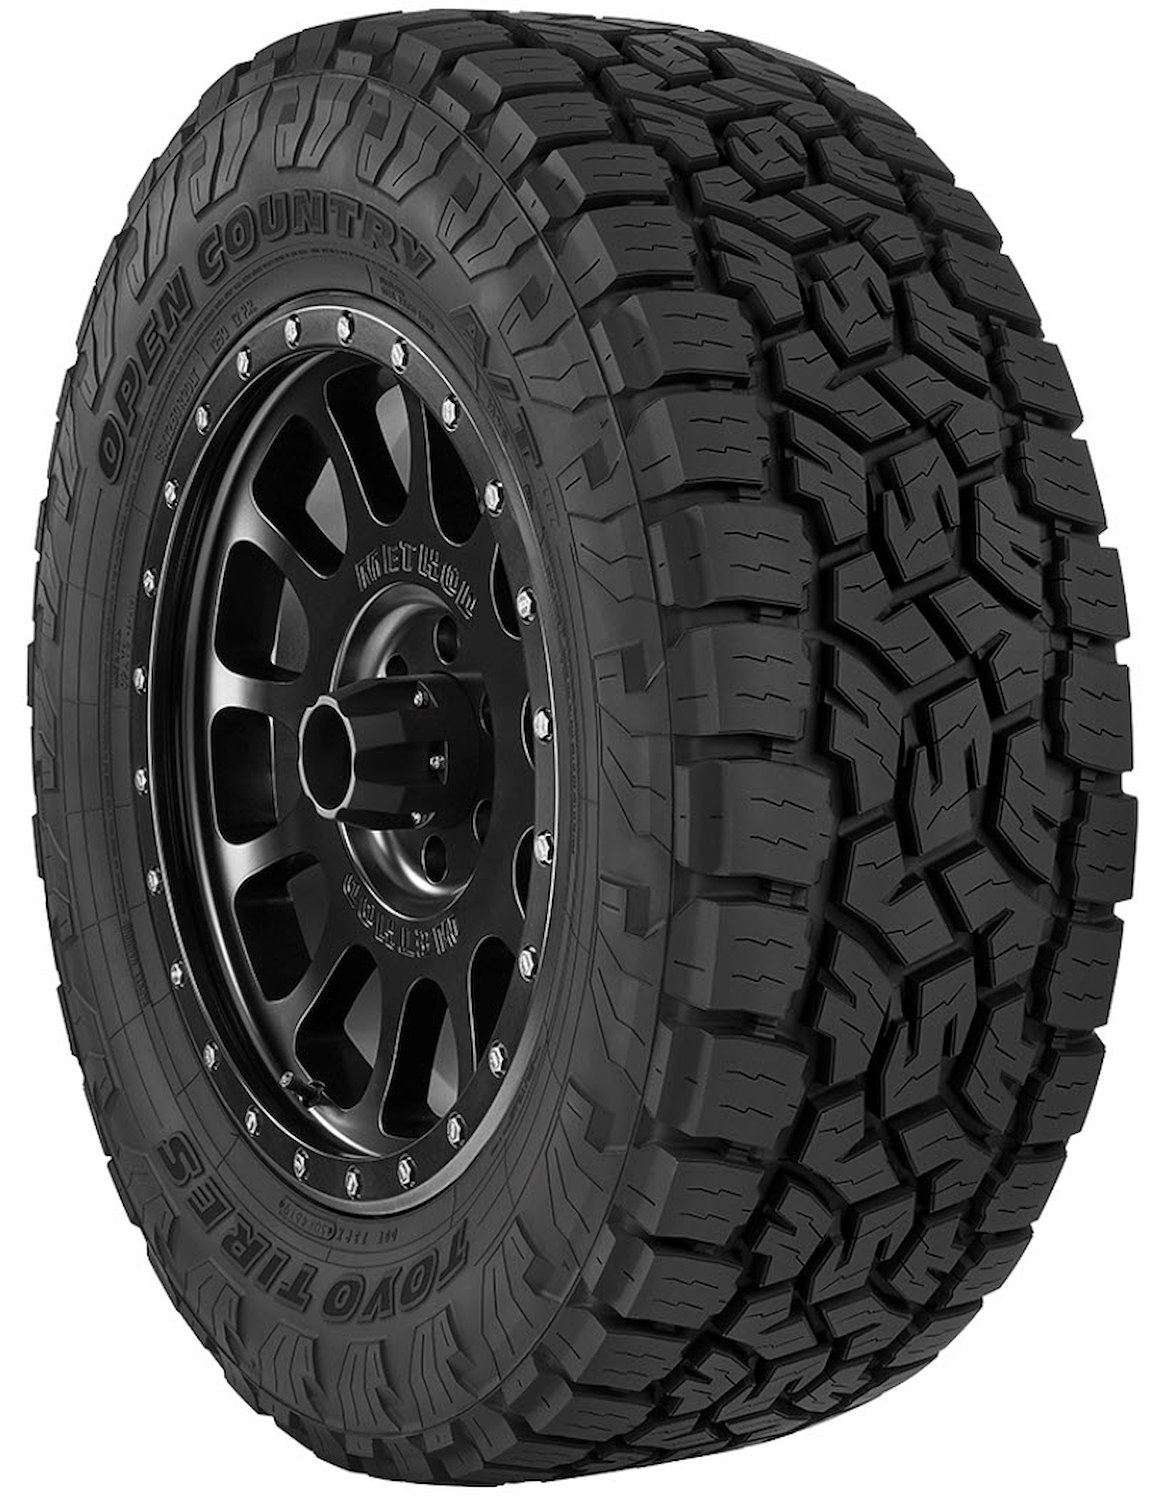 Open Country A/T III Light Truck Radial Tire LT295/75R16